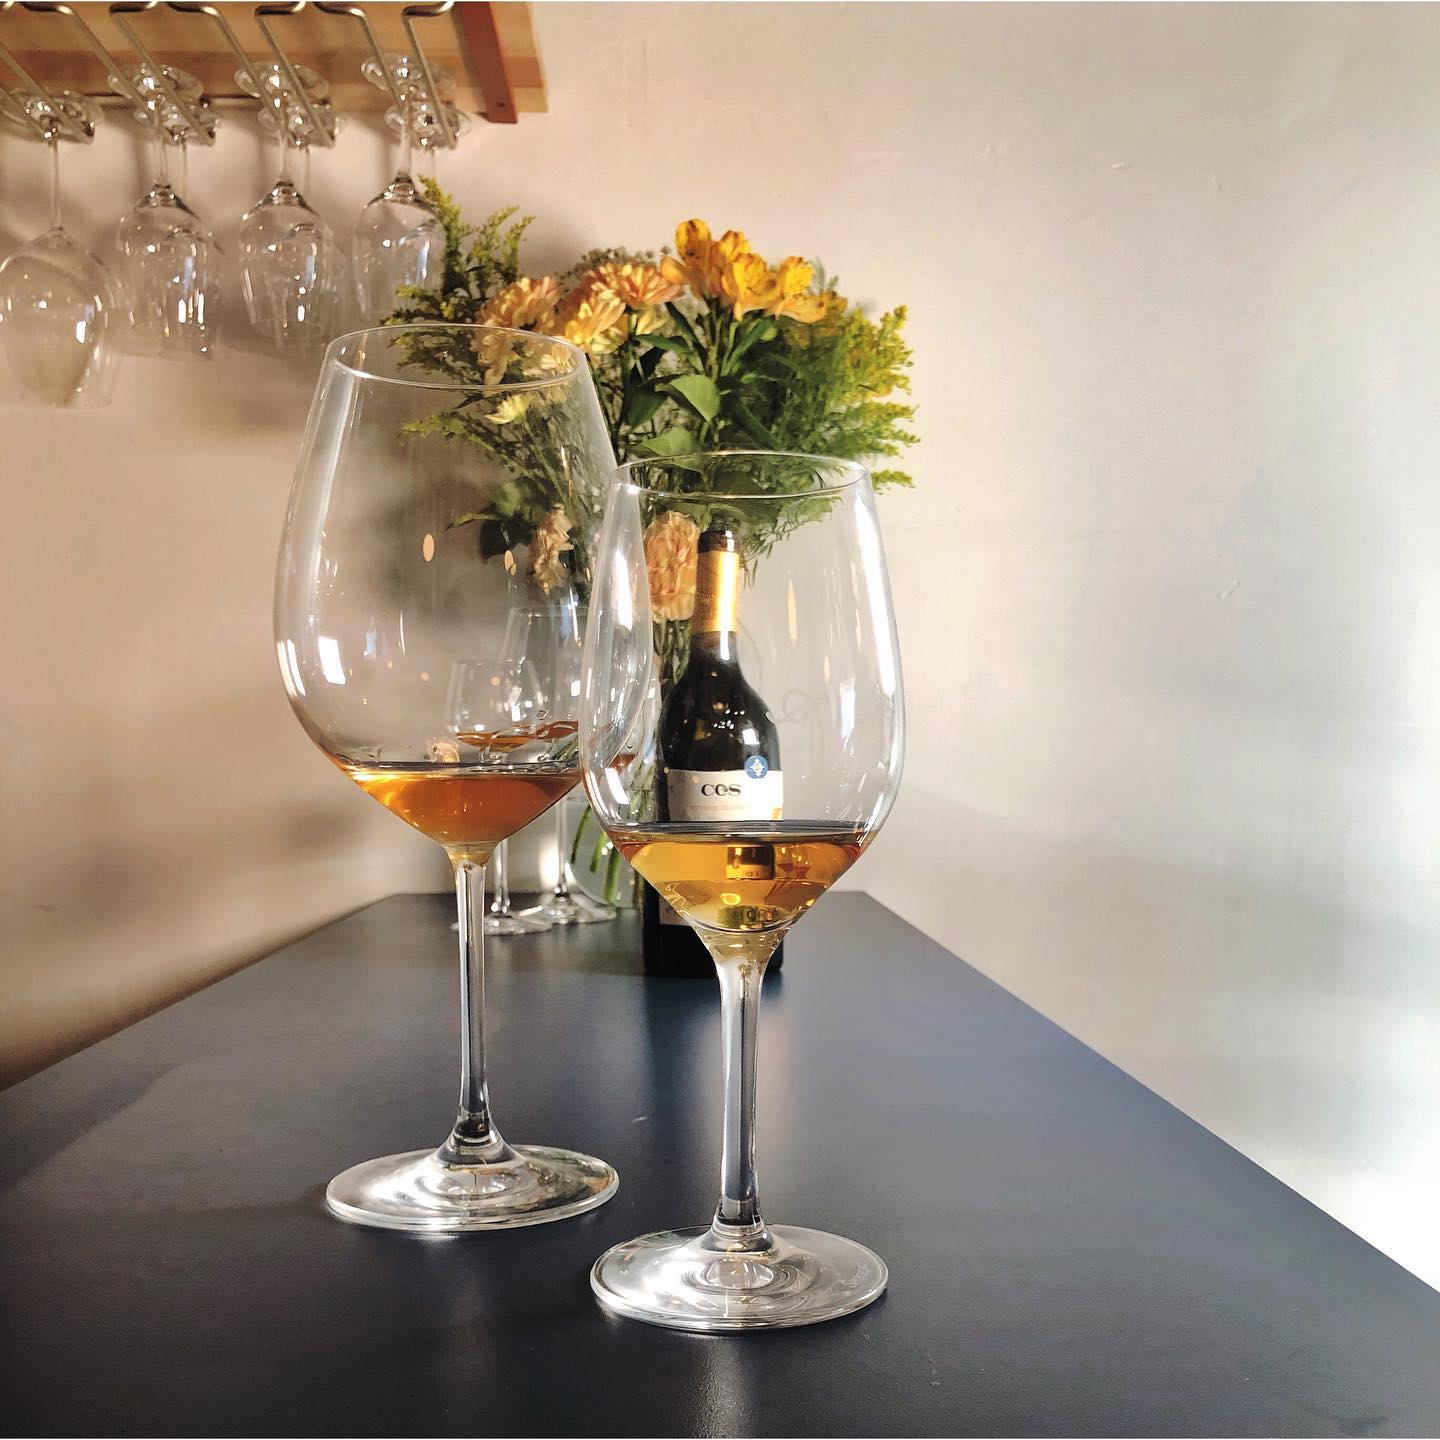 Two glasses of orange wine in front of a vase of flowers.